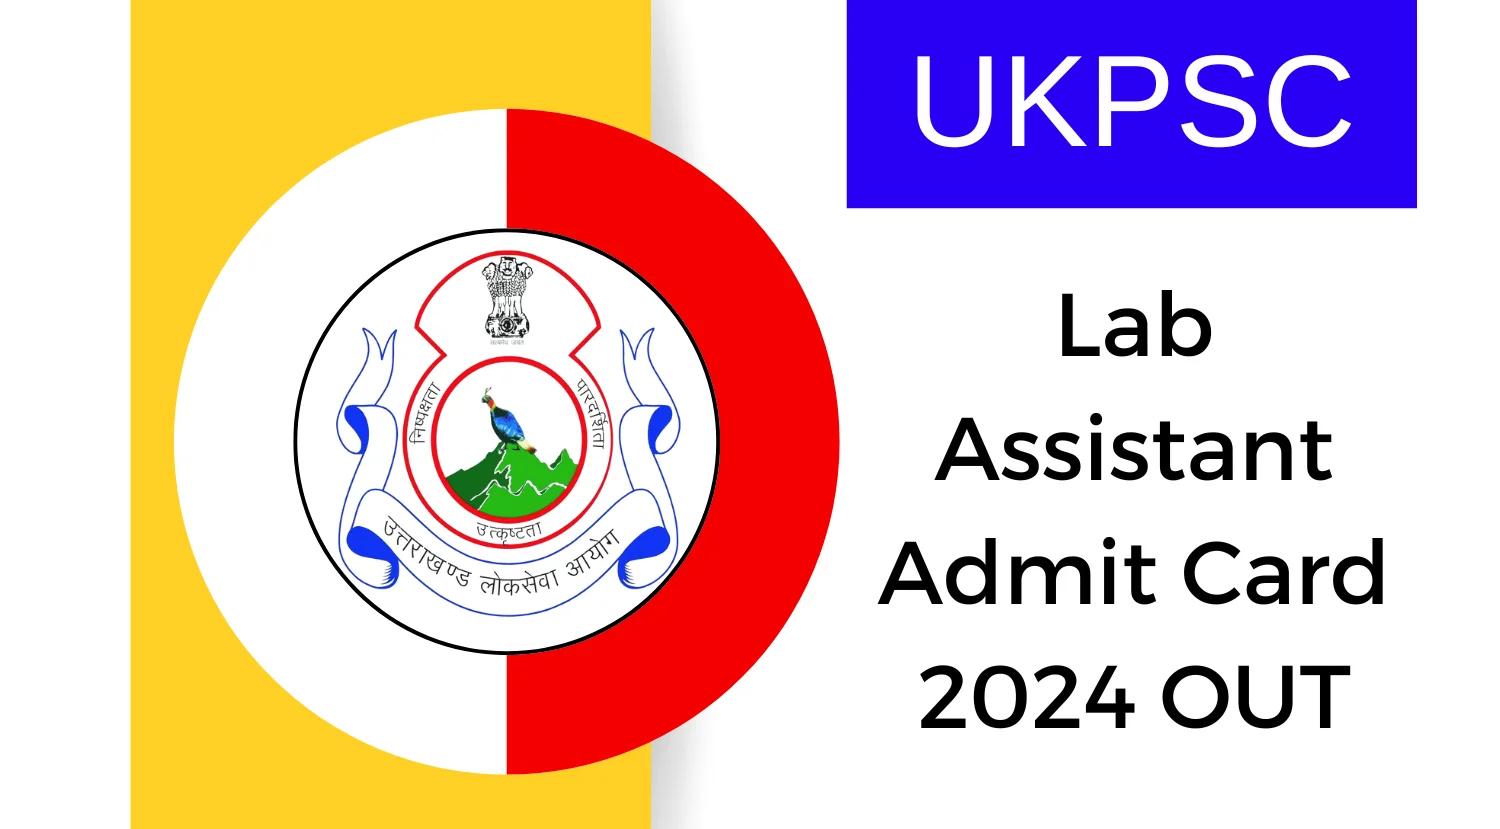 UKPSC Lab Assistant Admit Card 2024 OUT